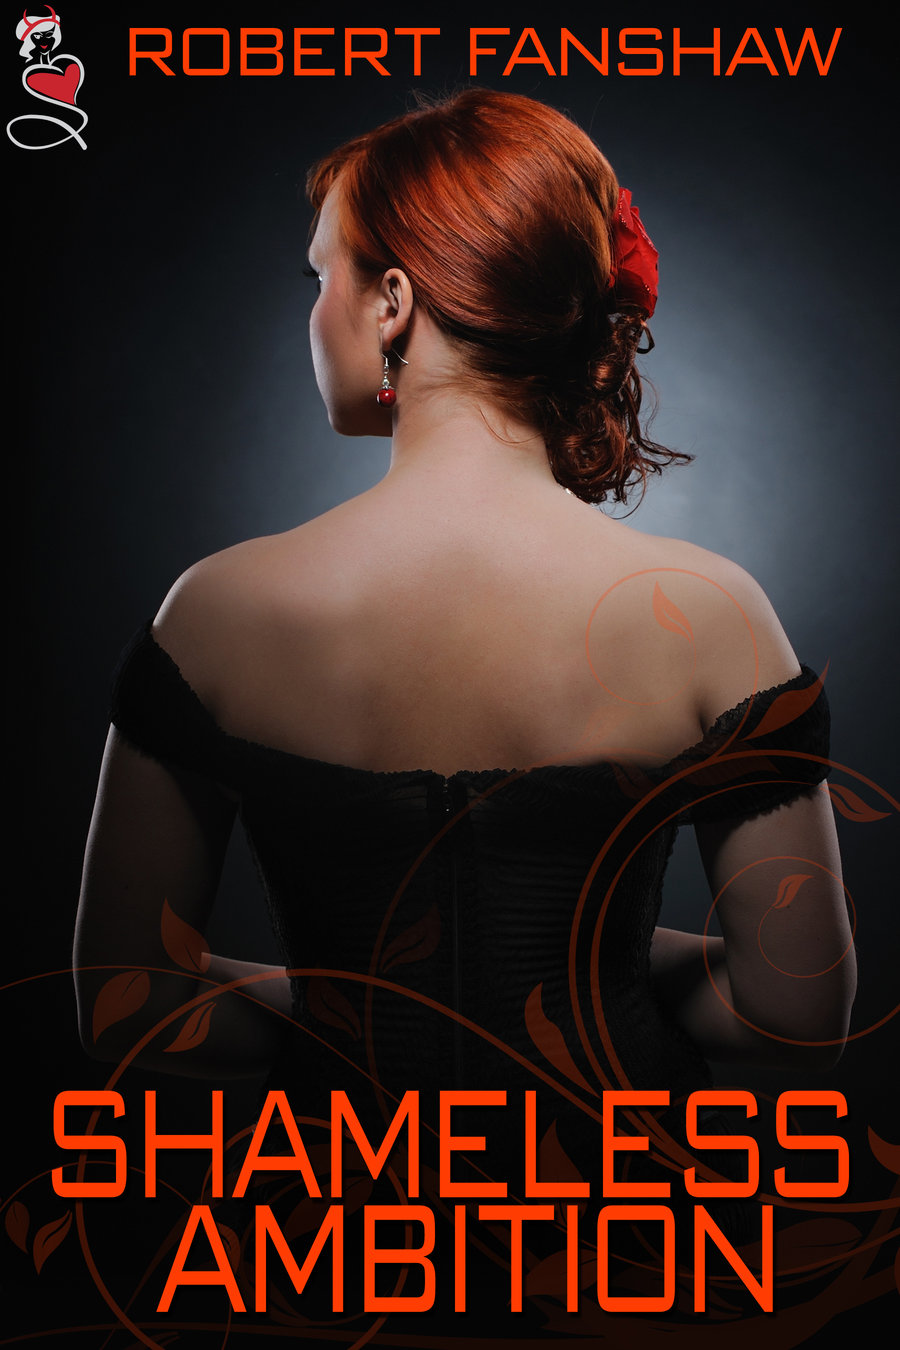 book cover image for Shameless Ambition by Robert Fanshaw depicting a redheaded woman in a dark fancy dress turned away from the audience as to exhibit an air of mystery